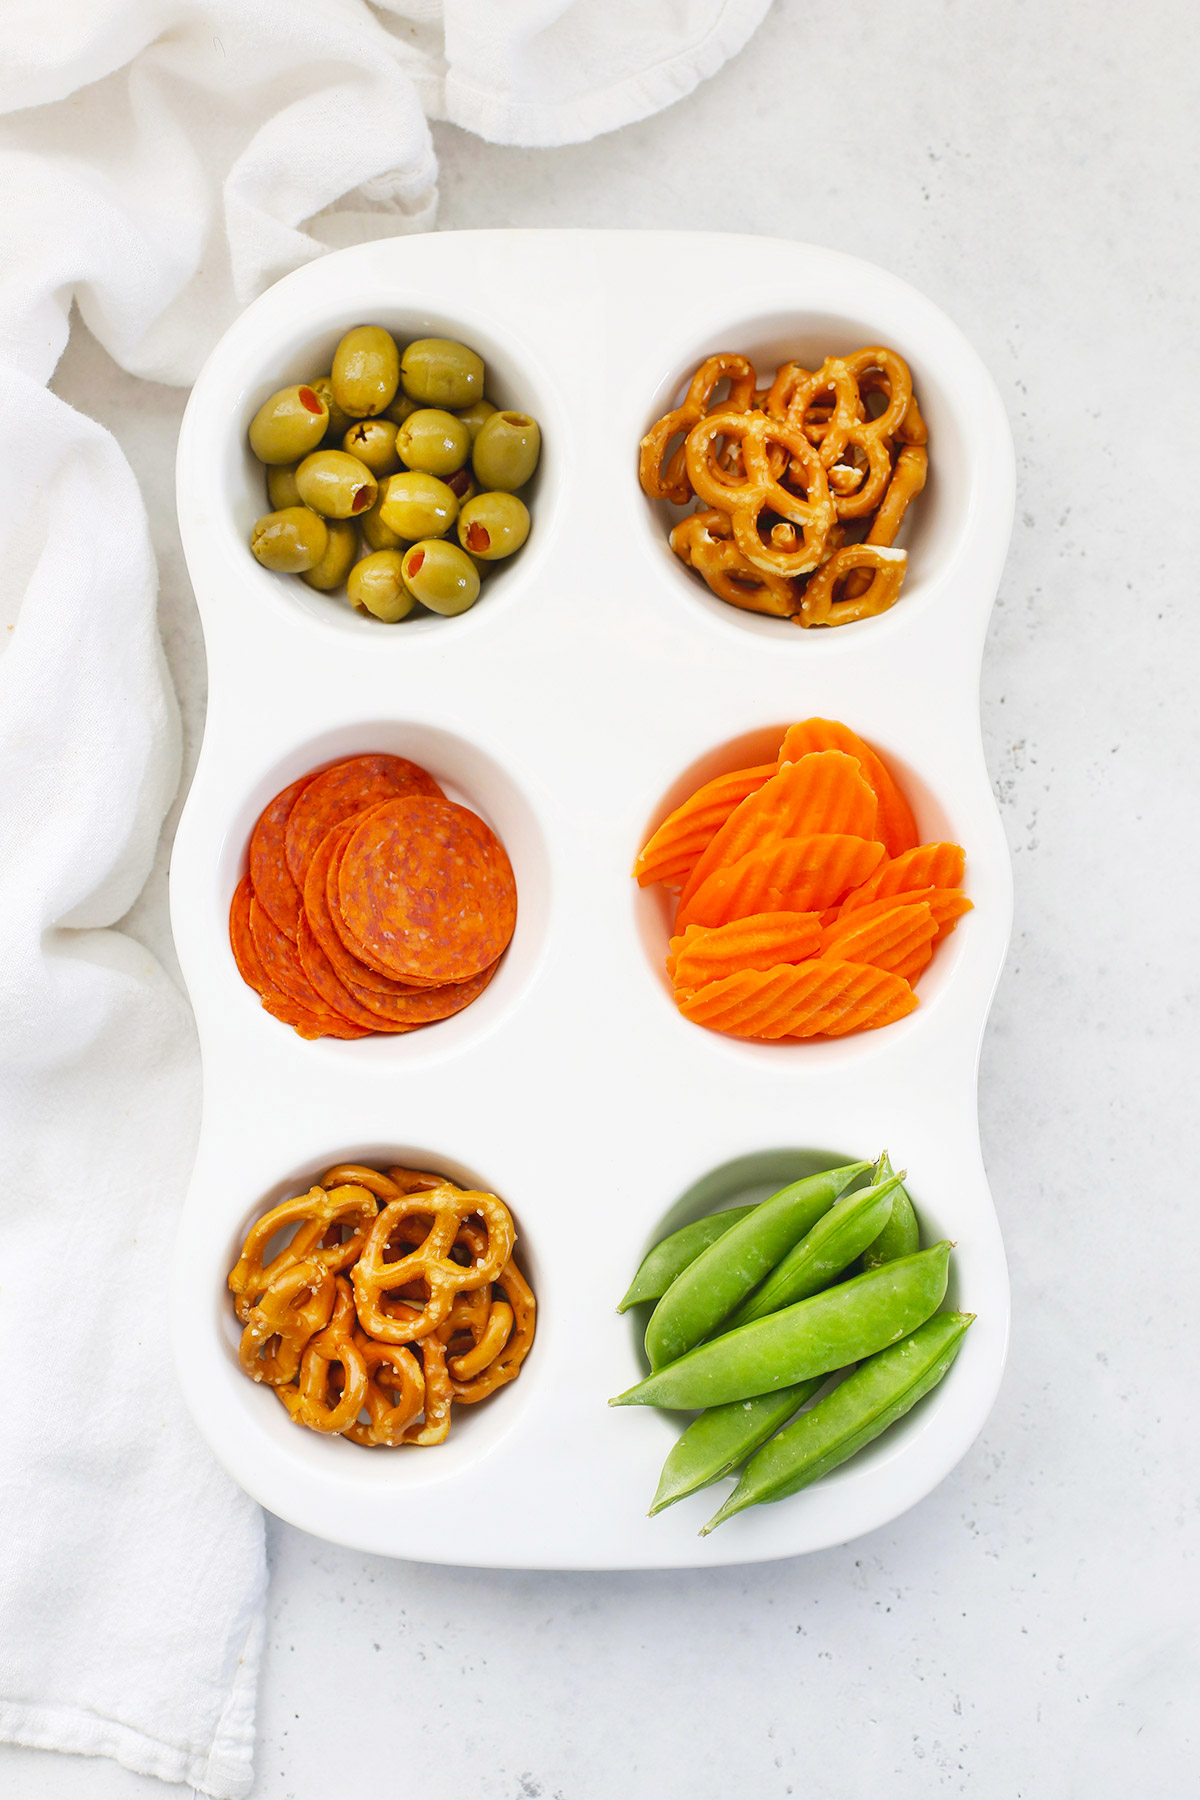 Muffin Tin Snack Tray For Kids with Green Olives, Gluten-Free Pretzels, Pepperoni Slices, Carrot Chips, and Sugar Snap Peas